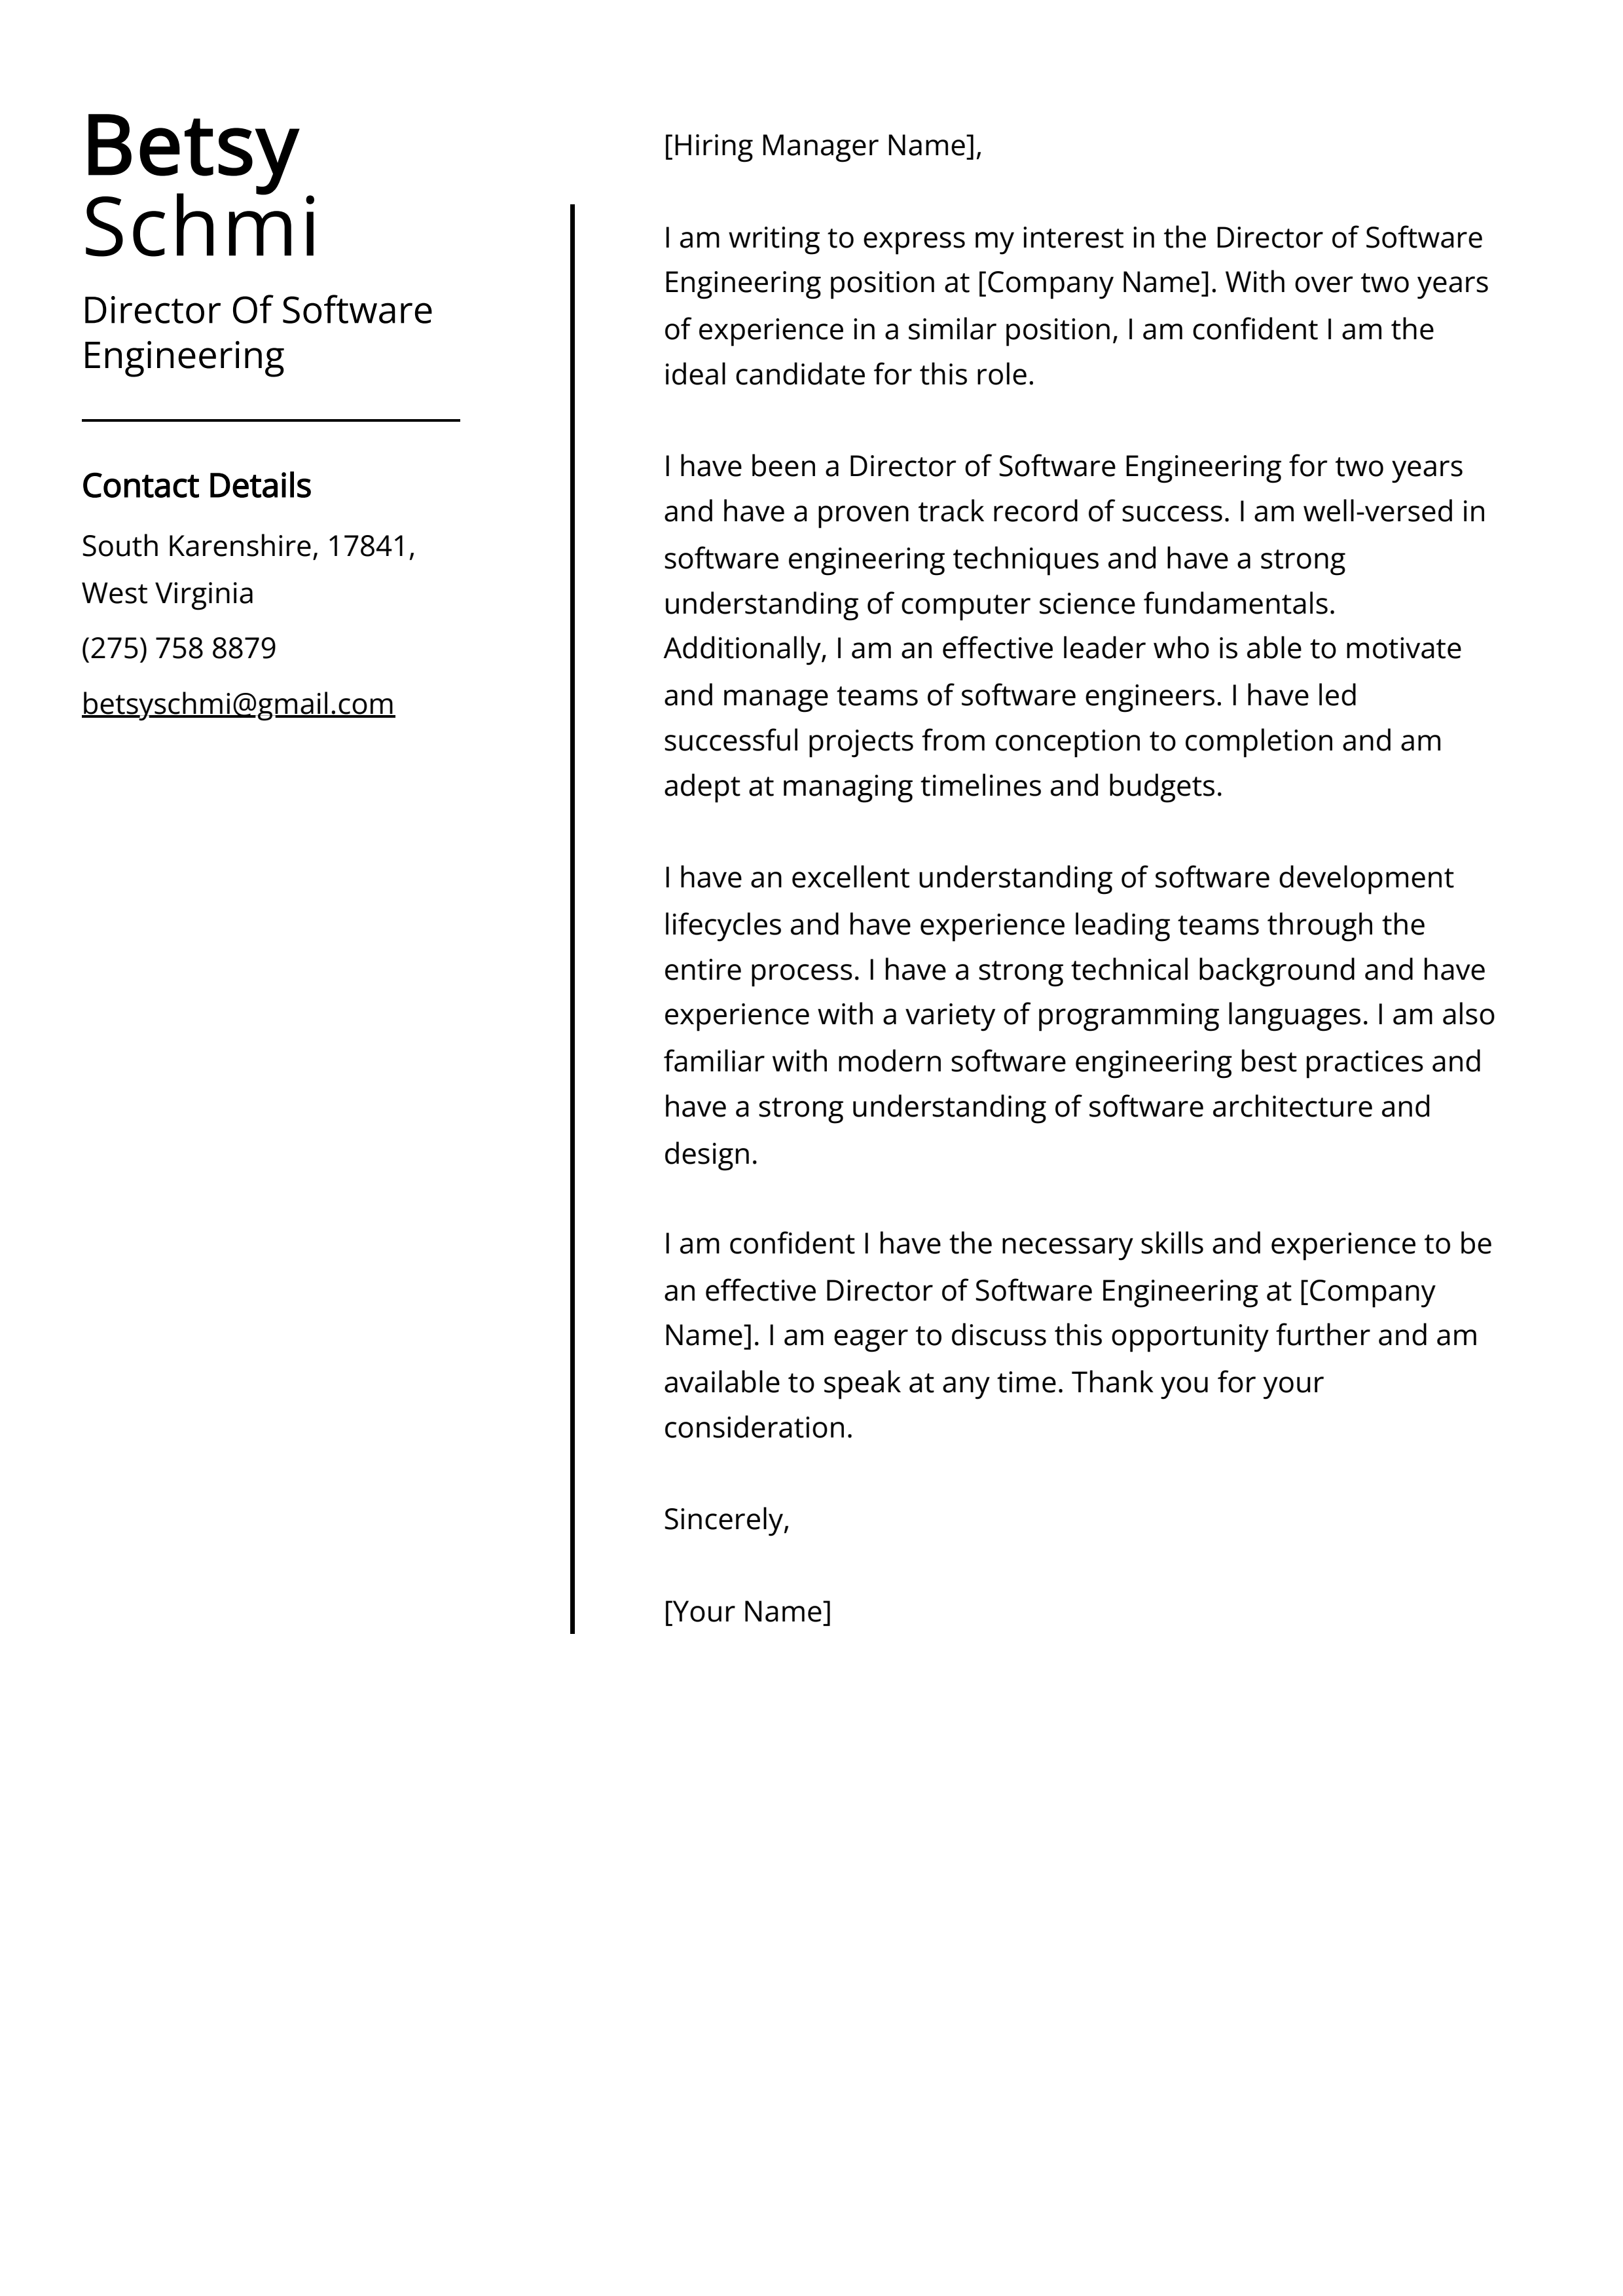 Director Of Software Engineering Cover Letter Example